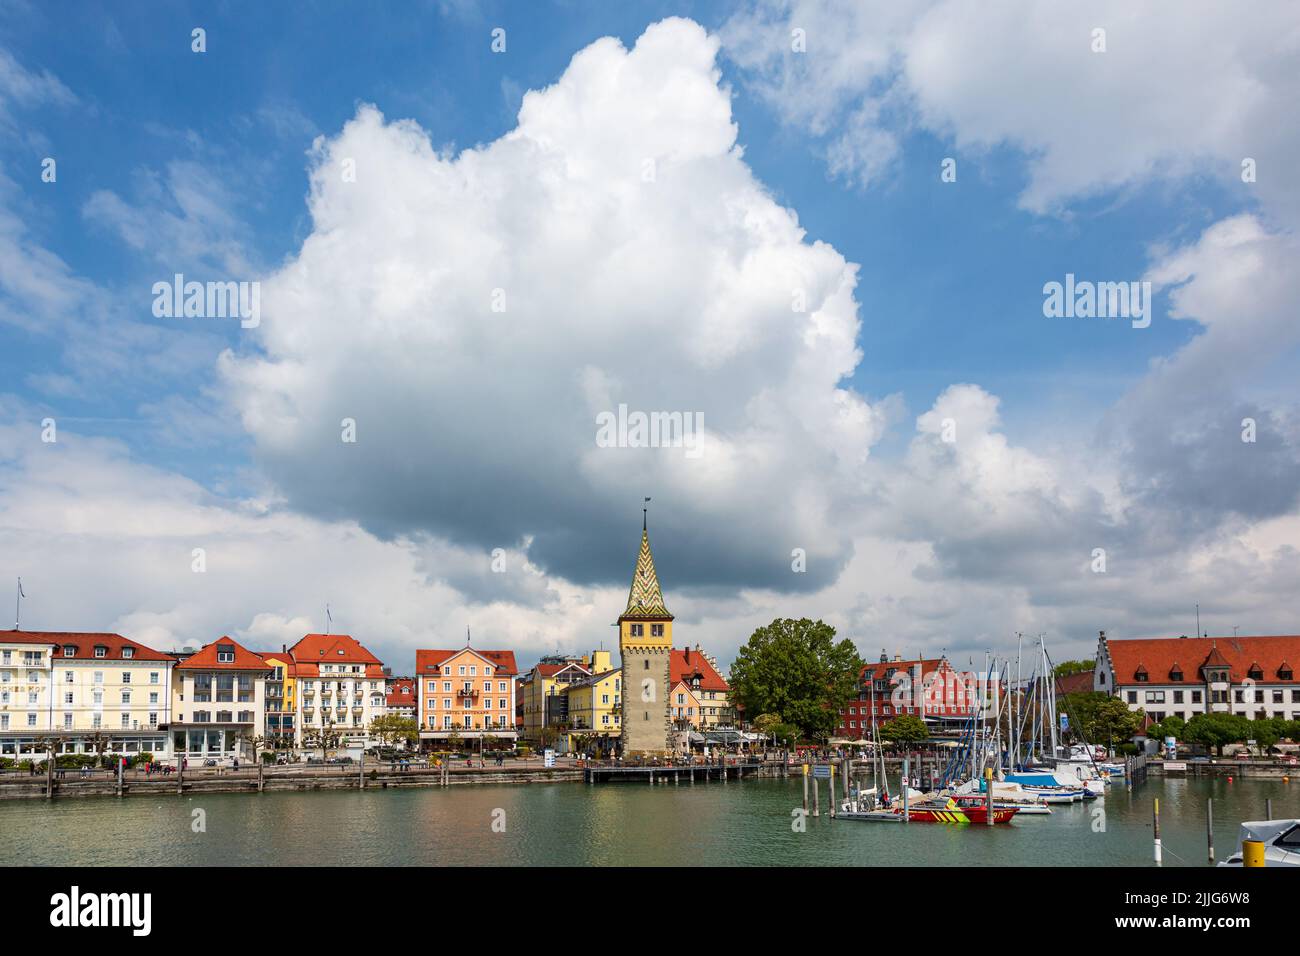 Harbor view of the city of Lindau, Lake Constance, Germany Stock Photo